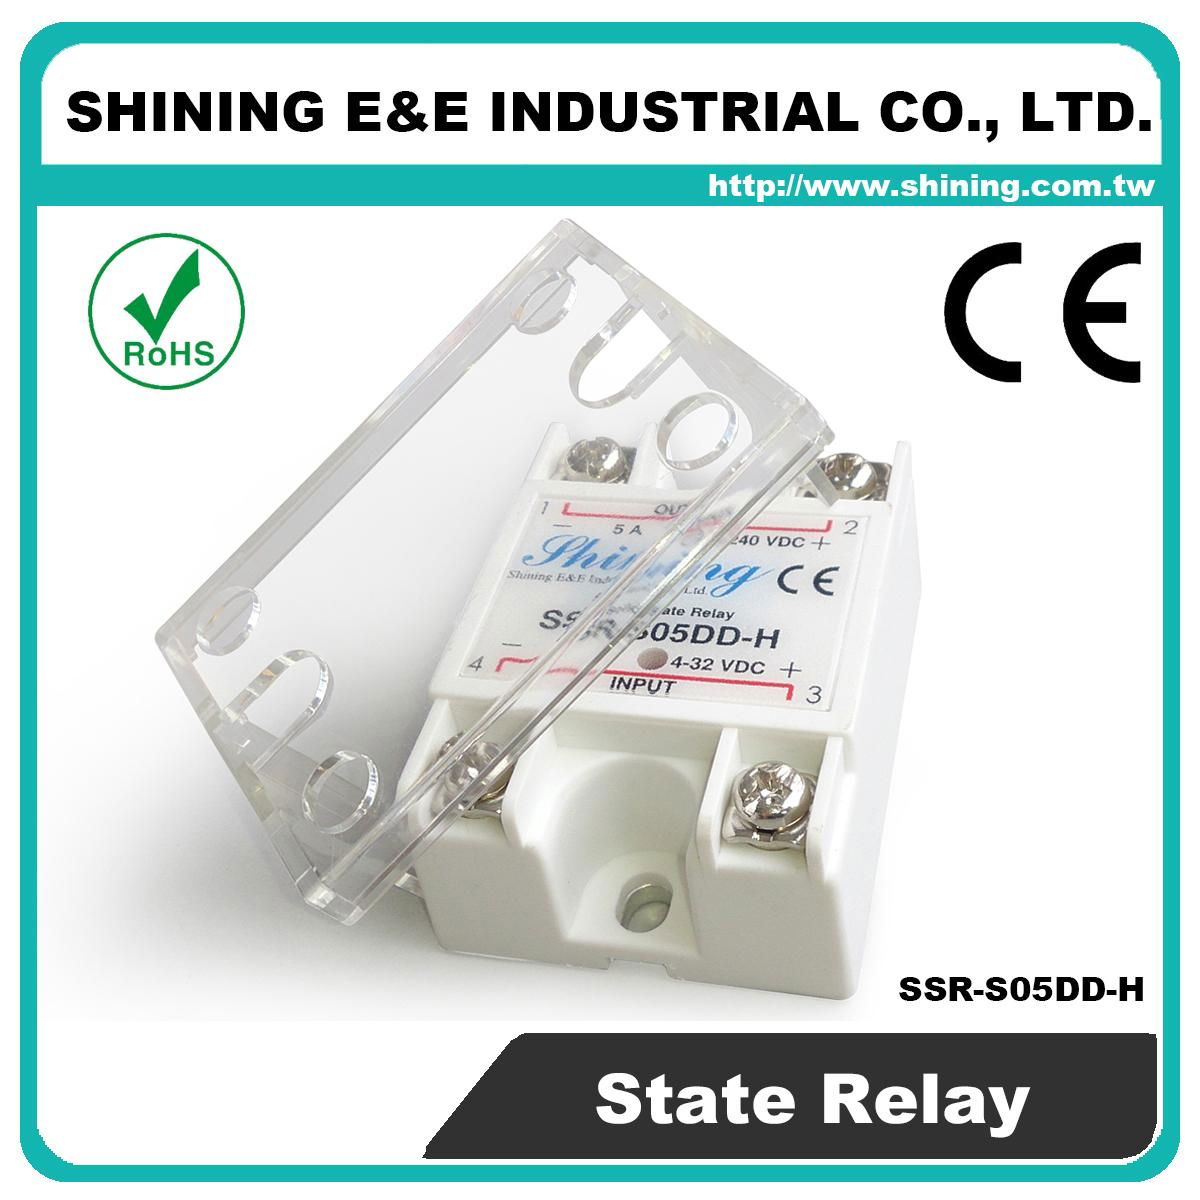 SSR-S05DD-H DC to DC Single Phase Photocouple Solid State Relay 2